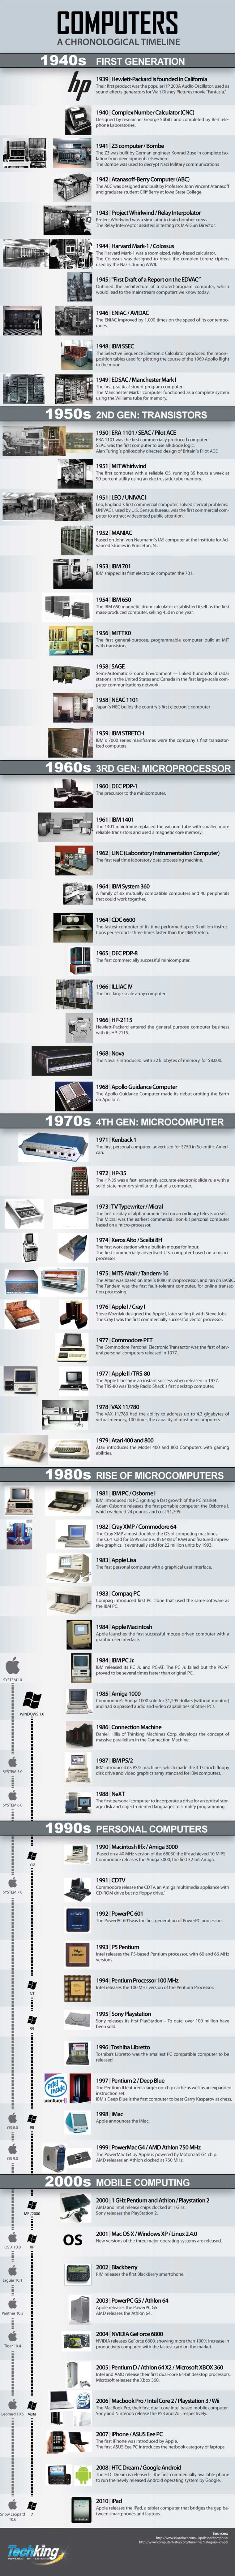 A Comprehensive History of Computers - Infographic